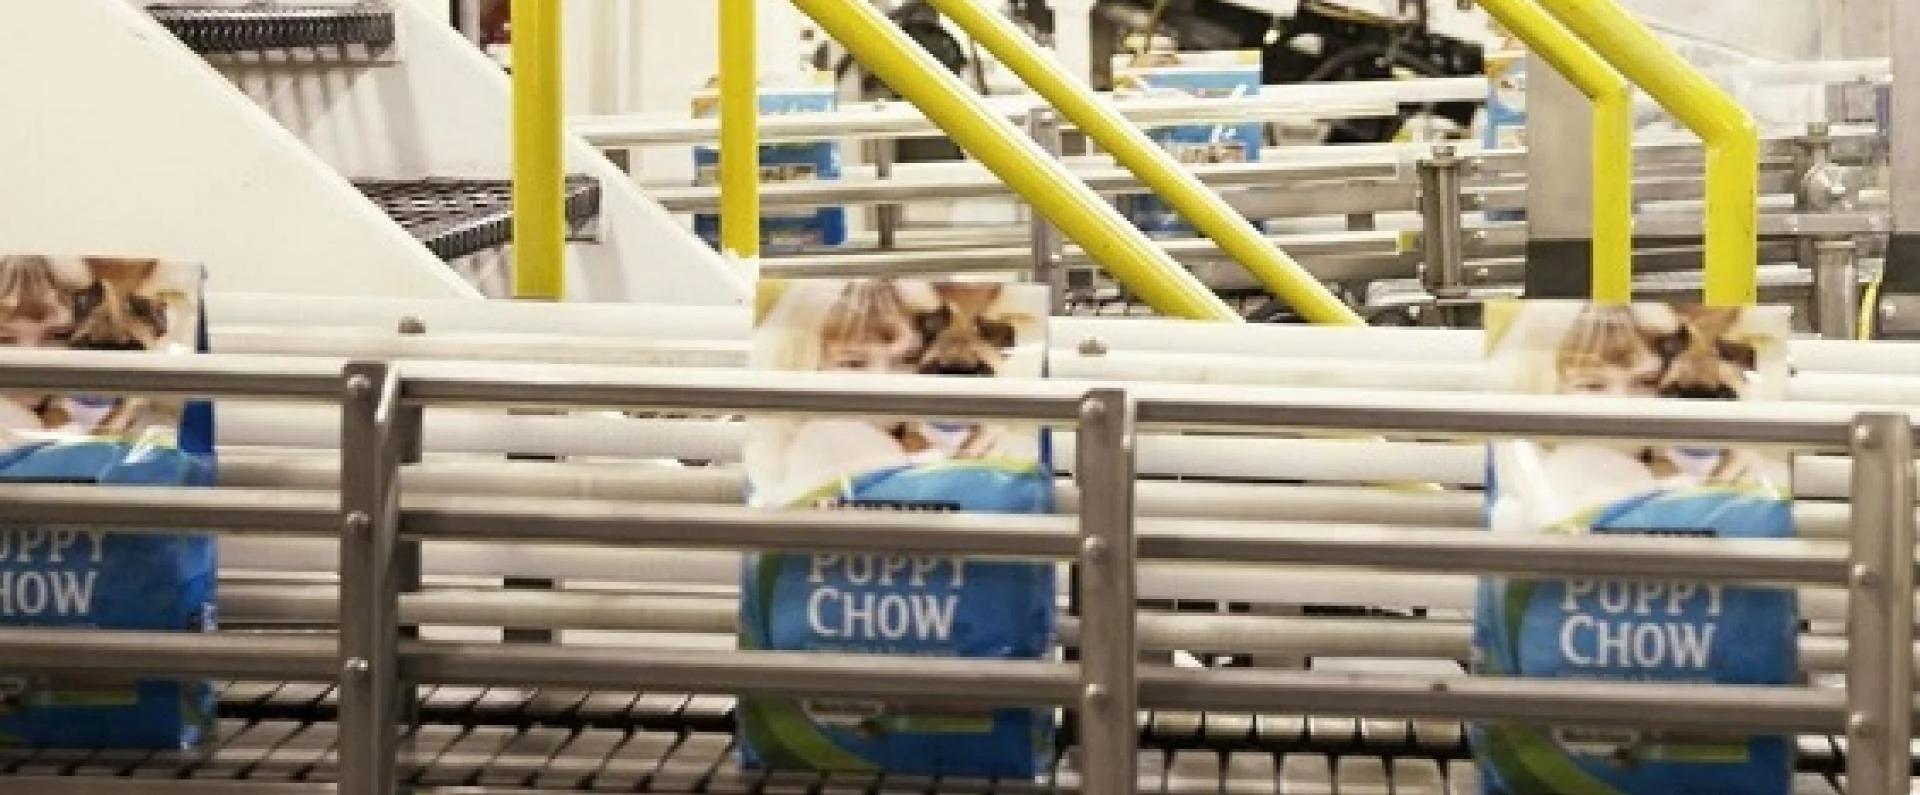 Puppy chow on assembly line